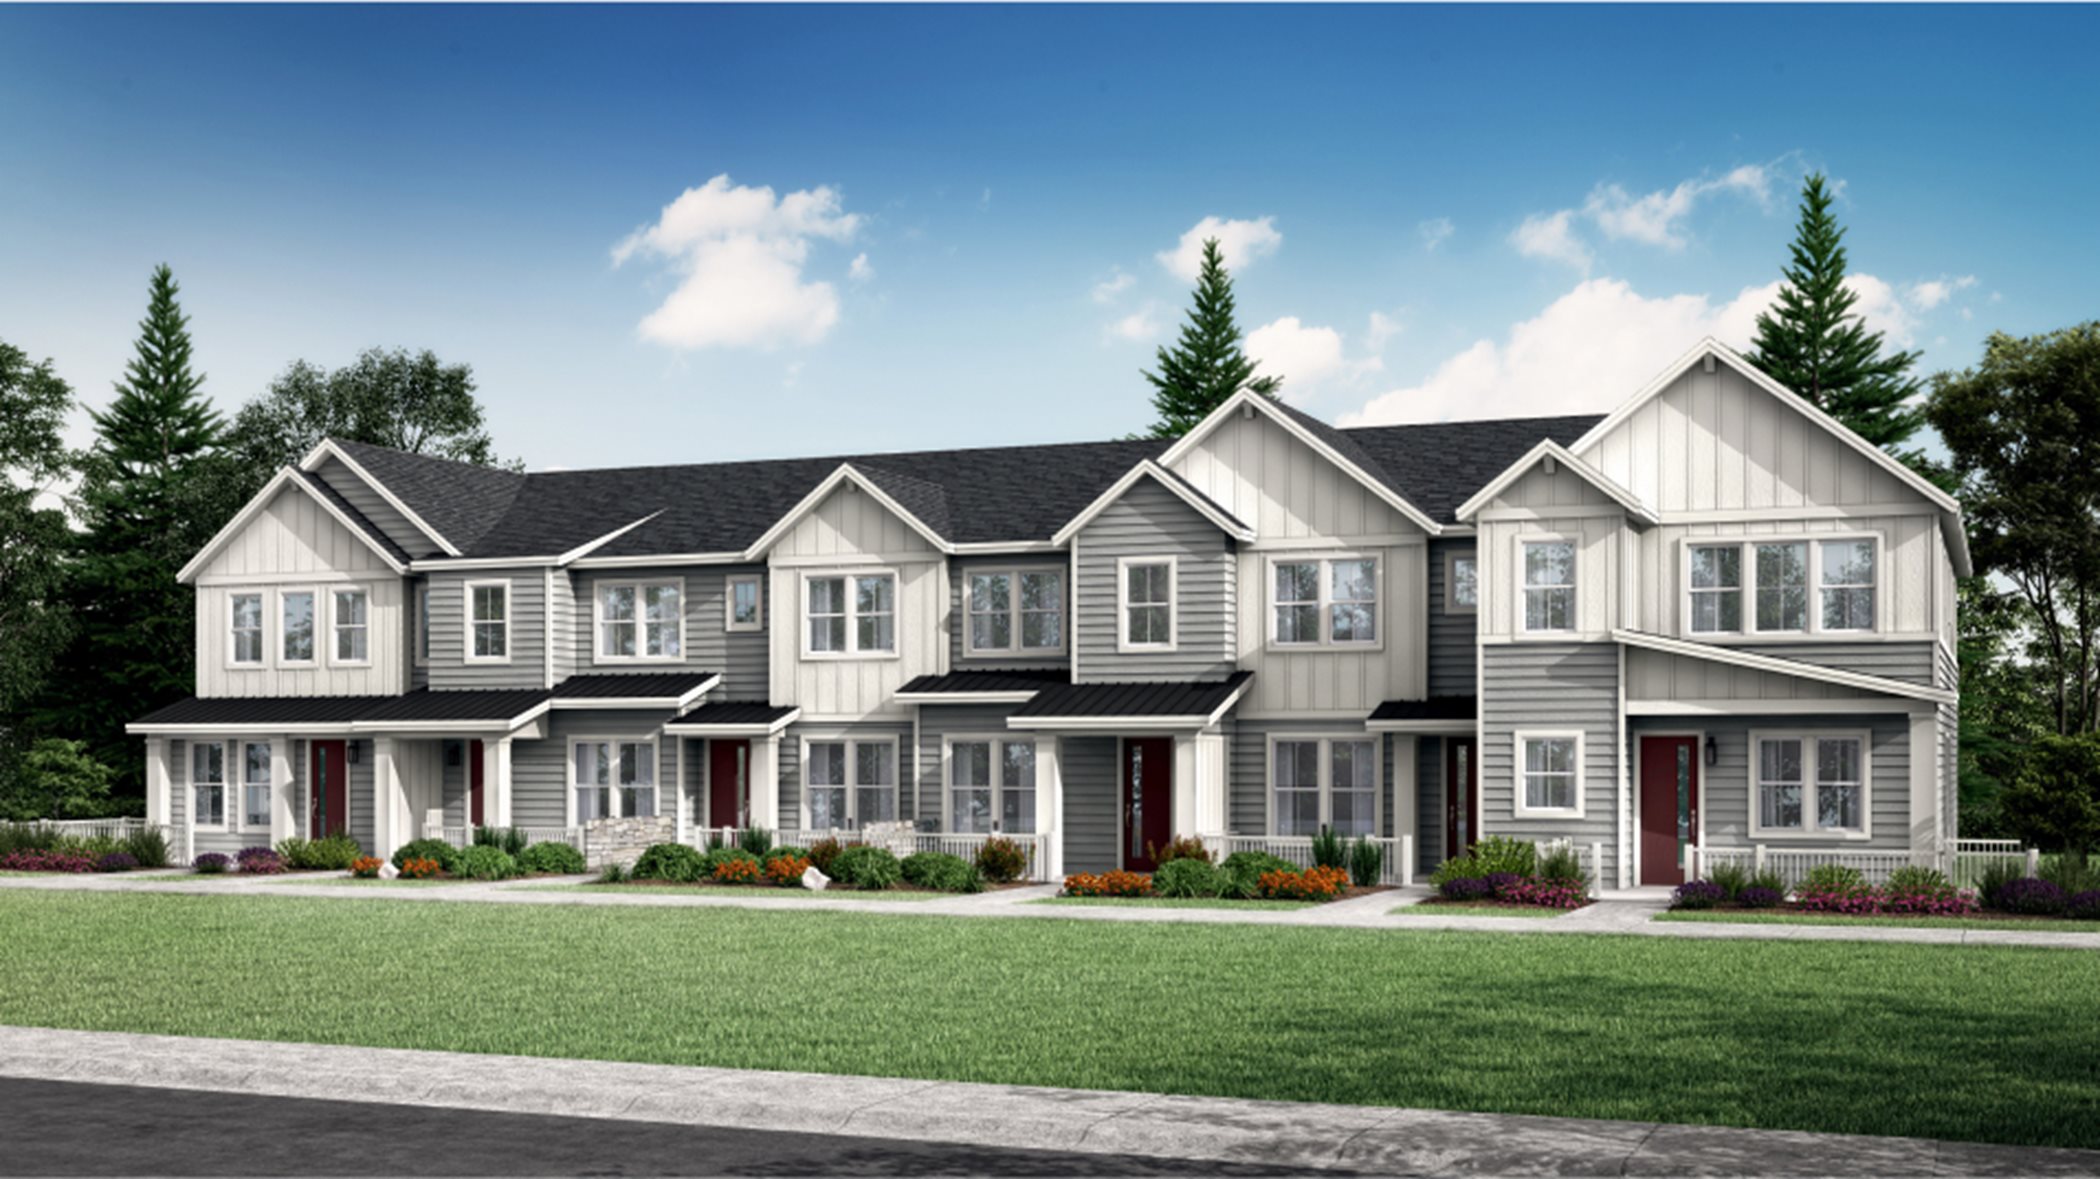 The Parkside Townhomes - Green Gables Plan 301R Contemporary Farmhouse